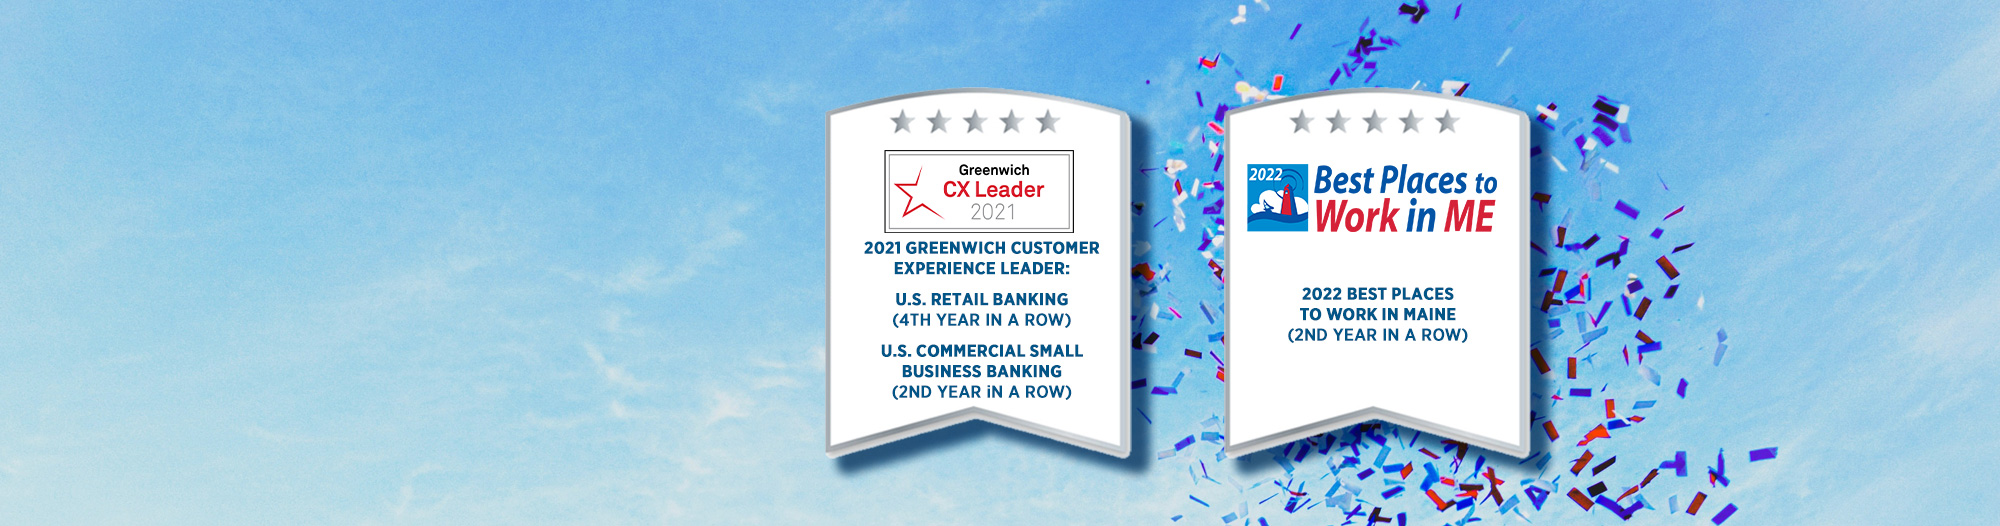 CX Leader 2022 & Best Places to Work in ME